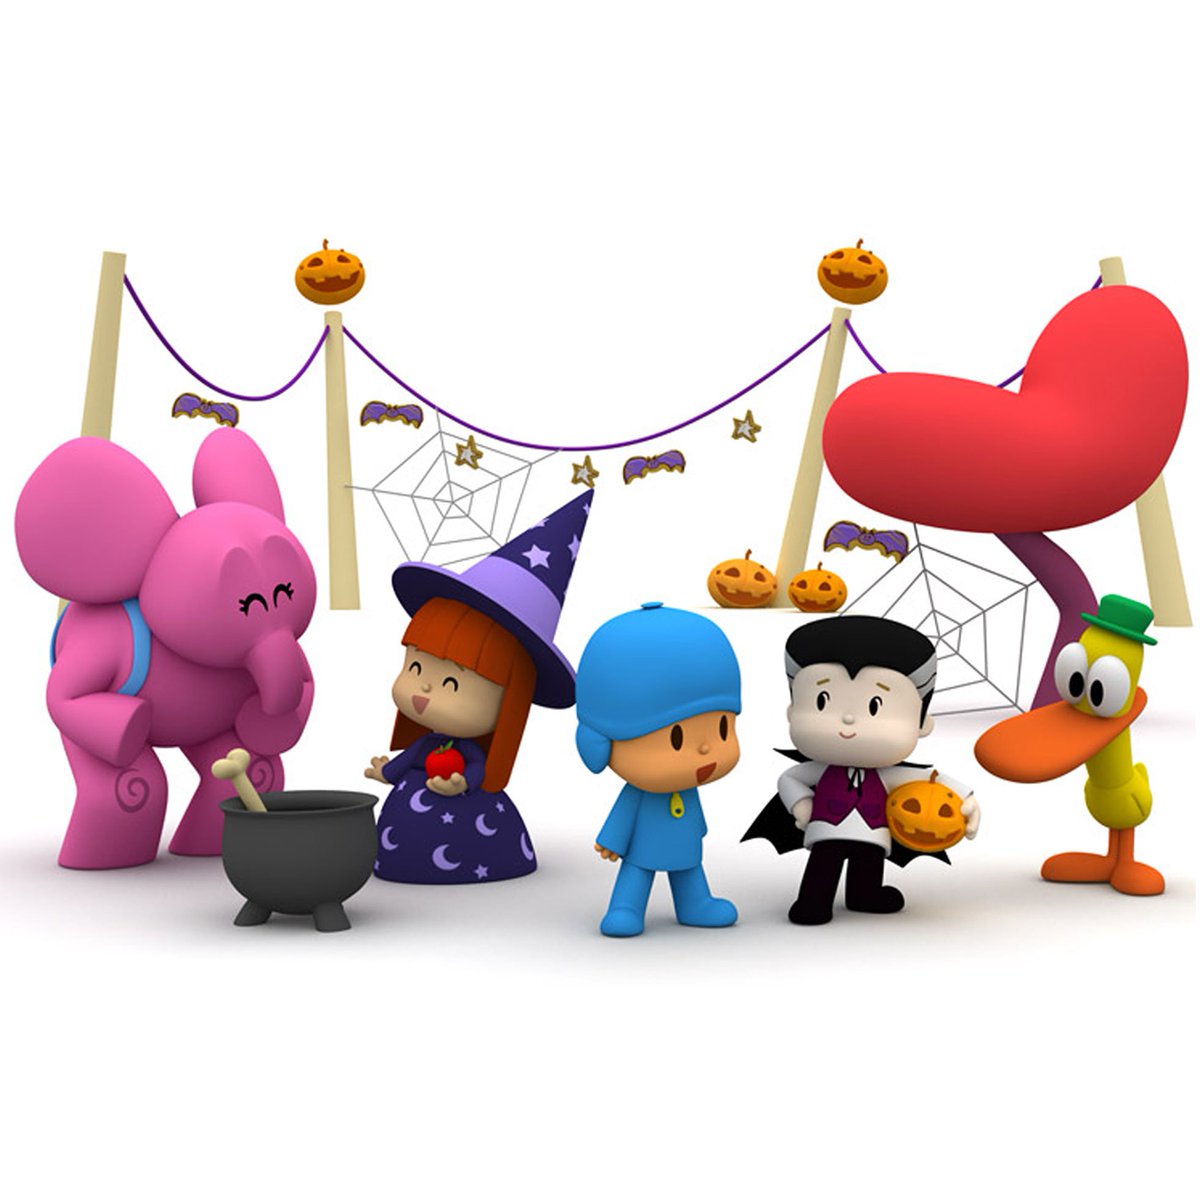 Pocoyo "Which costume will you wear on Halloween? Answer adding #HalloweenPocoyo! https://t.co/8MxPEFeaKt" / Twitter